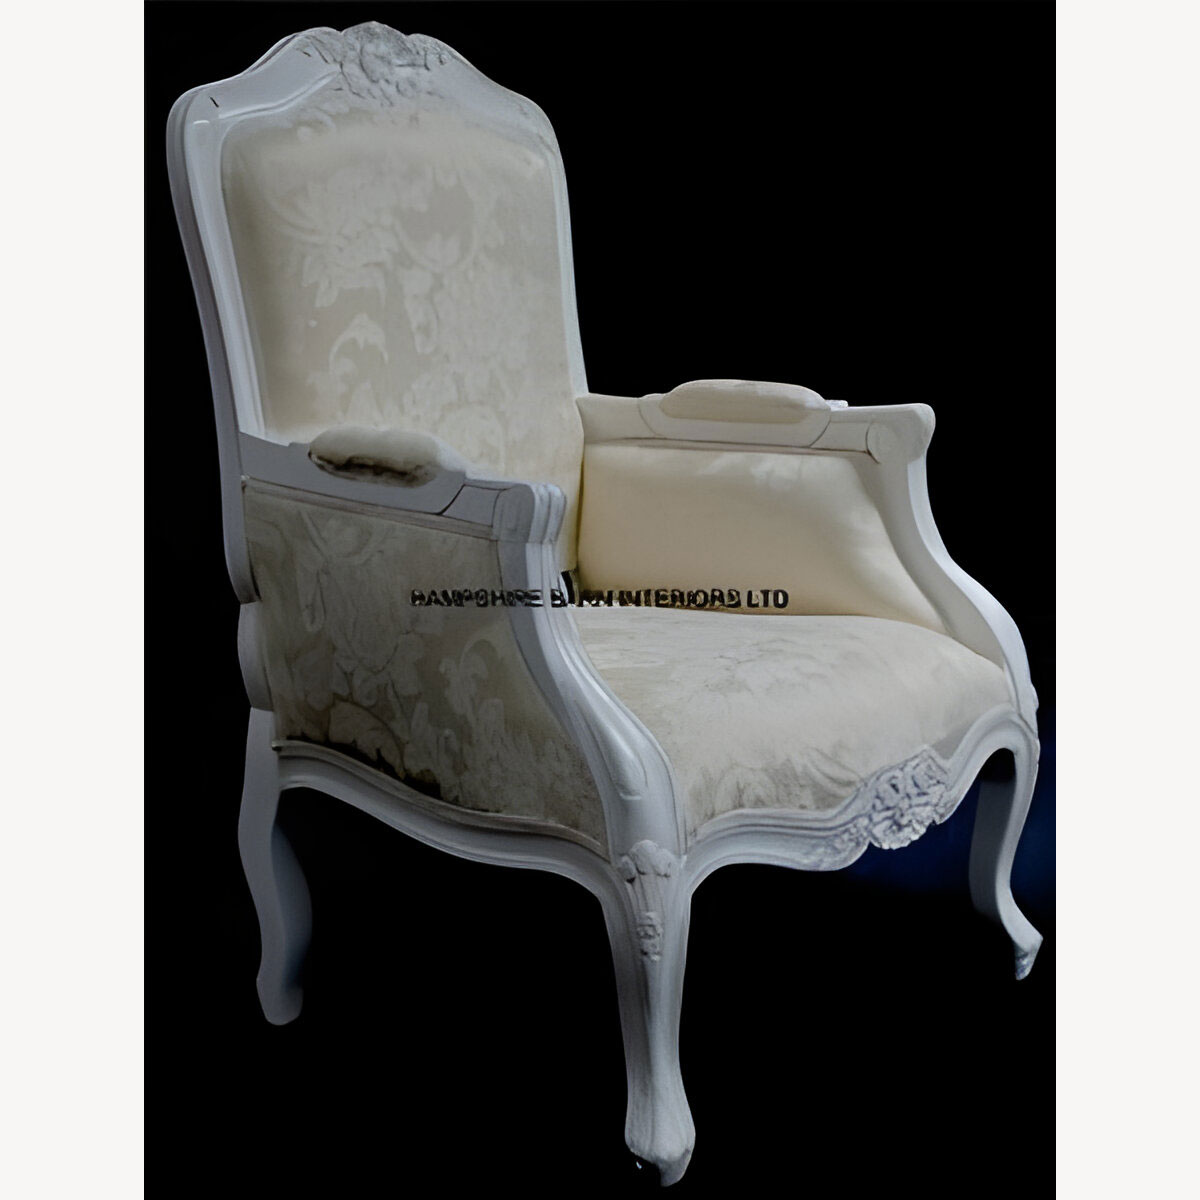 French Chateau Style Ornate Arm Chair Bedroom Antique White Boudoir Shop Lounge 2 - Hampshire Barn Interiors - French Chateau Style Ornate Arm Chair Bedroom Antique White Boudoir Shop Lounge -